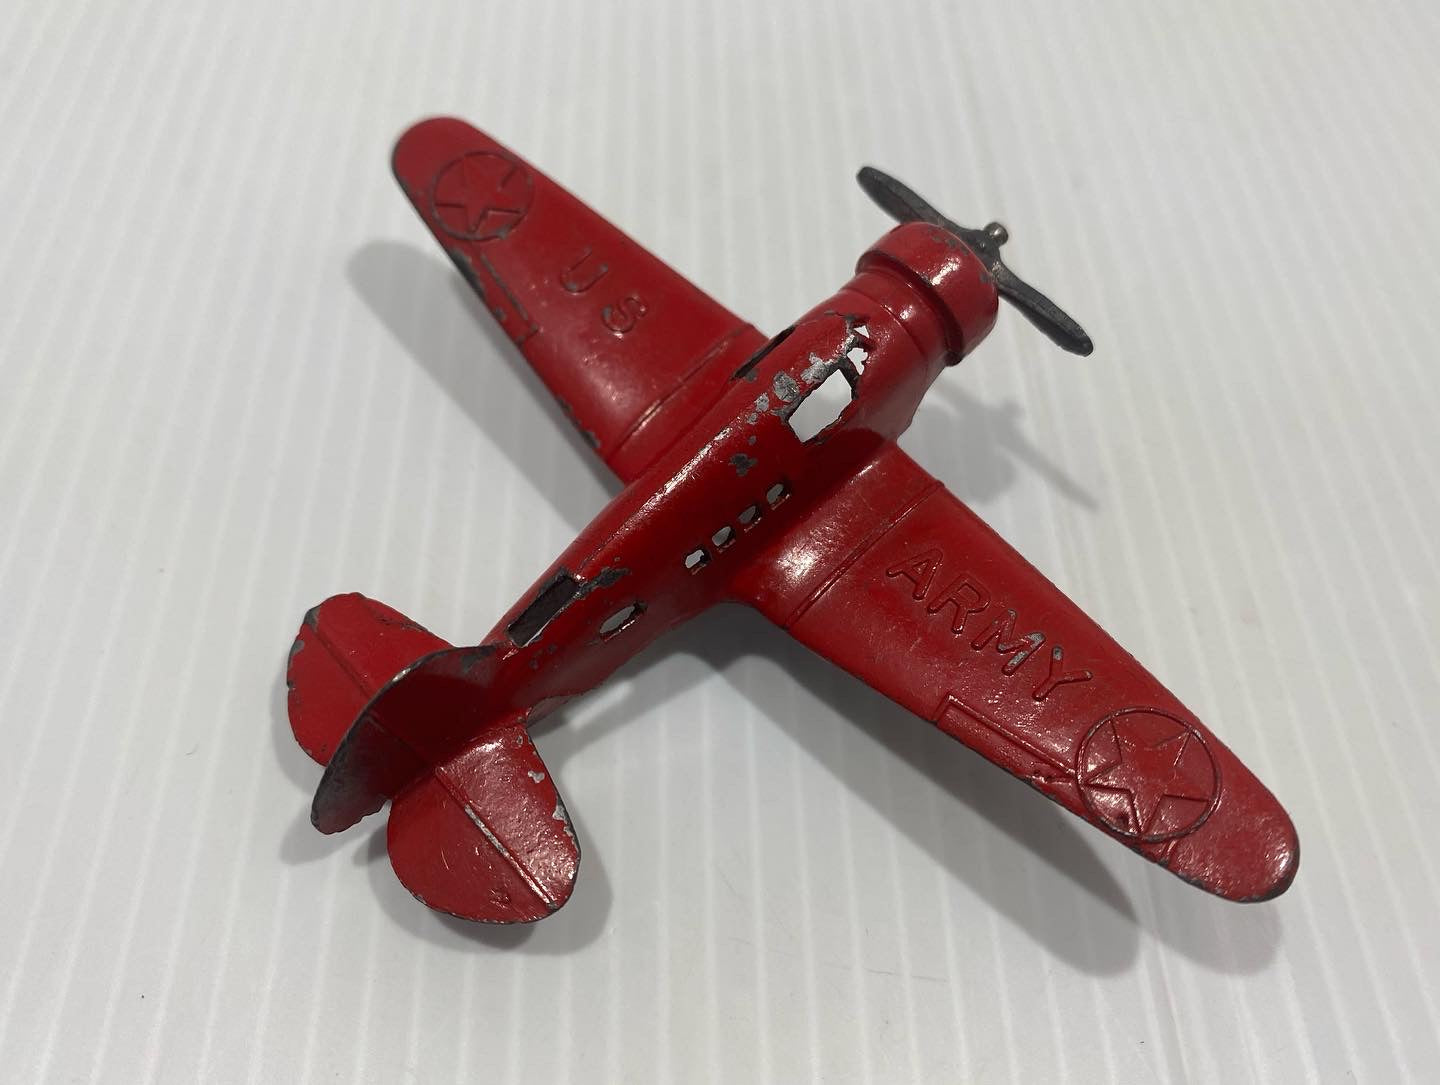 Rare cast iron Barclay Manoil US Army Airplane 1930s. Boeing P-29 Aircraft , Red, 1934.